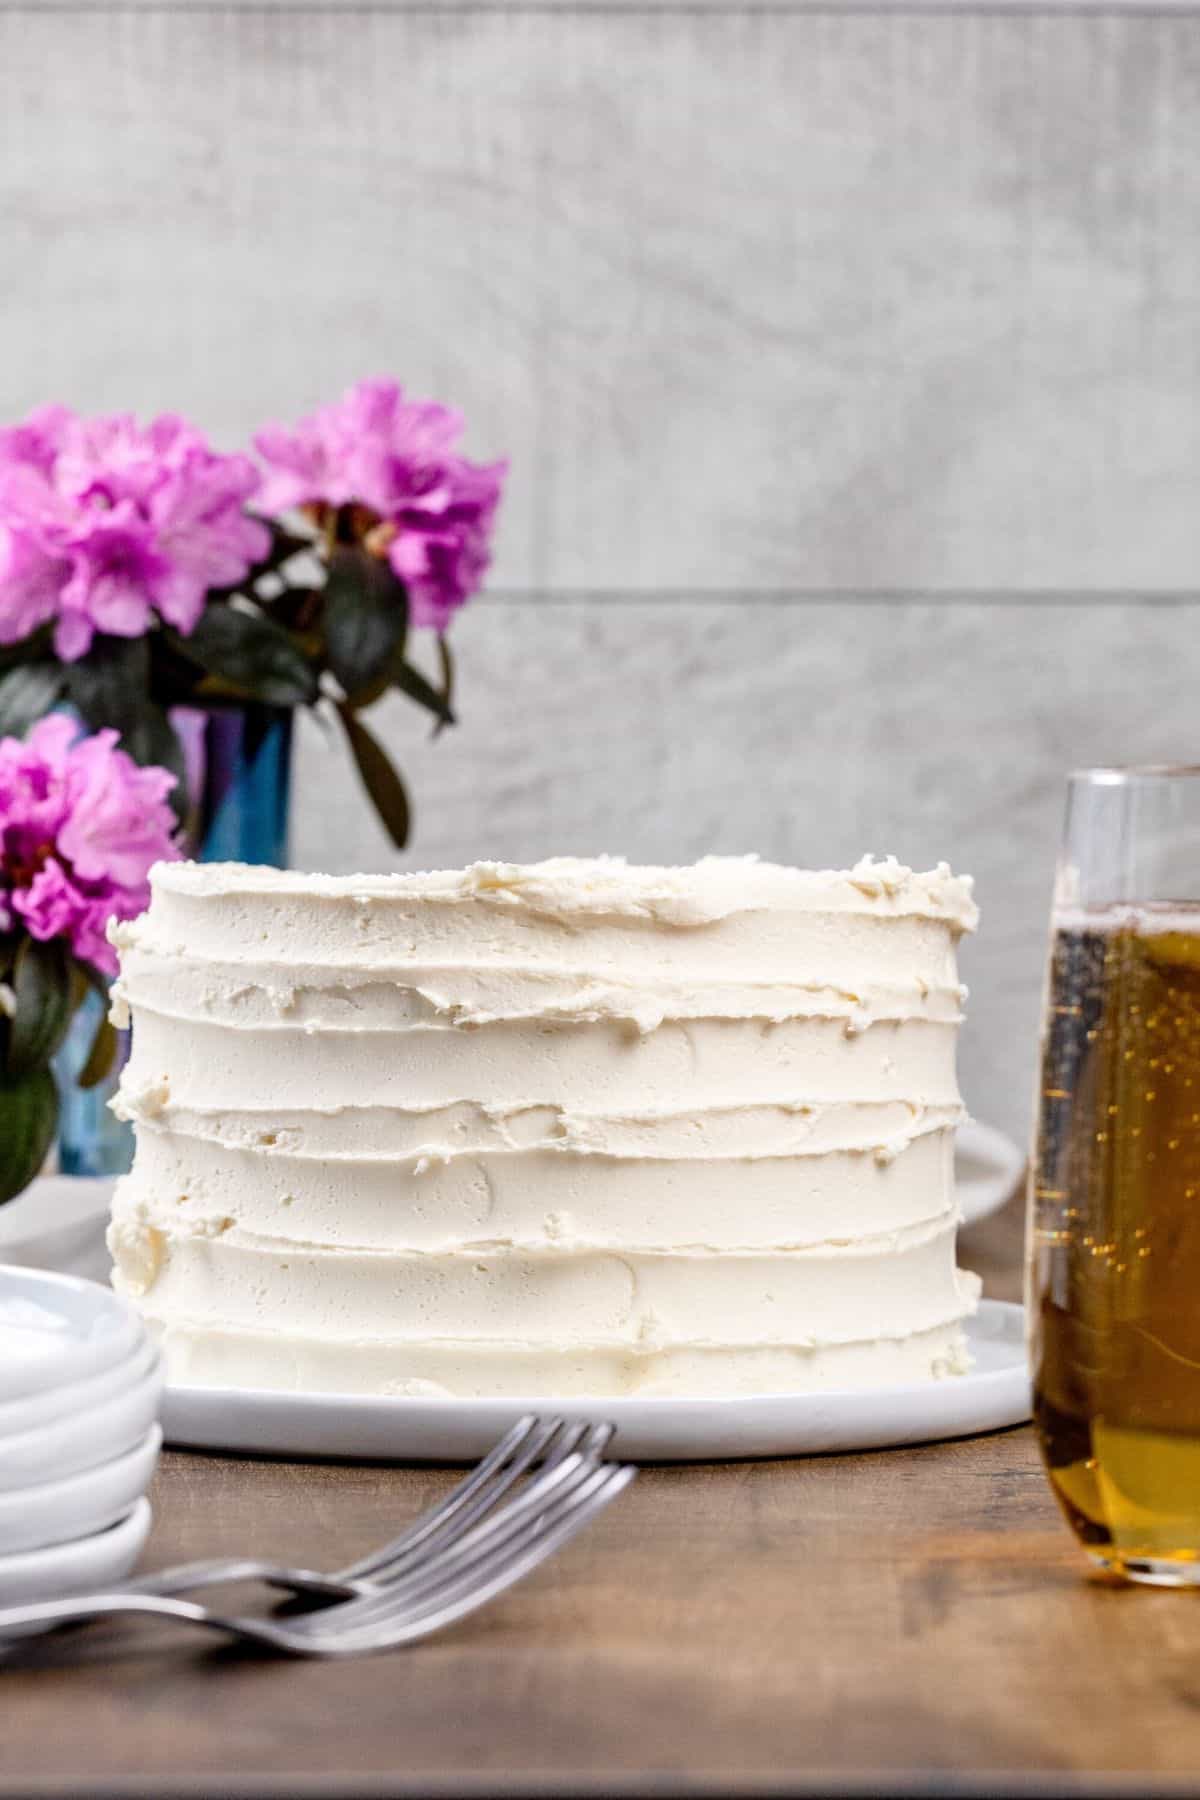 A vegan vanilla cake covered in vanilla frosting is on a round white plate on the kitchen table. It's next to a stack of plates, forks, and a glass of champagne. Pink flowers are blurred in the background.